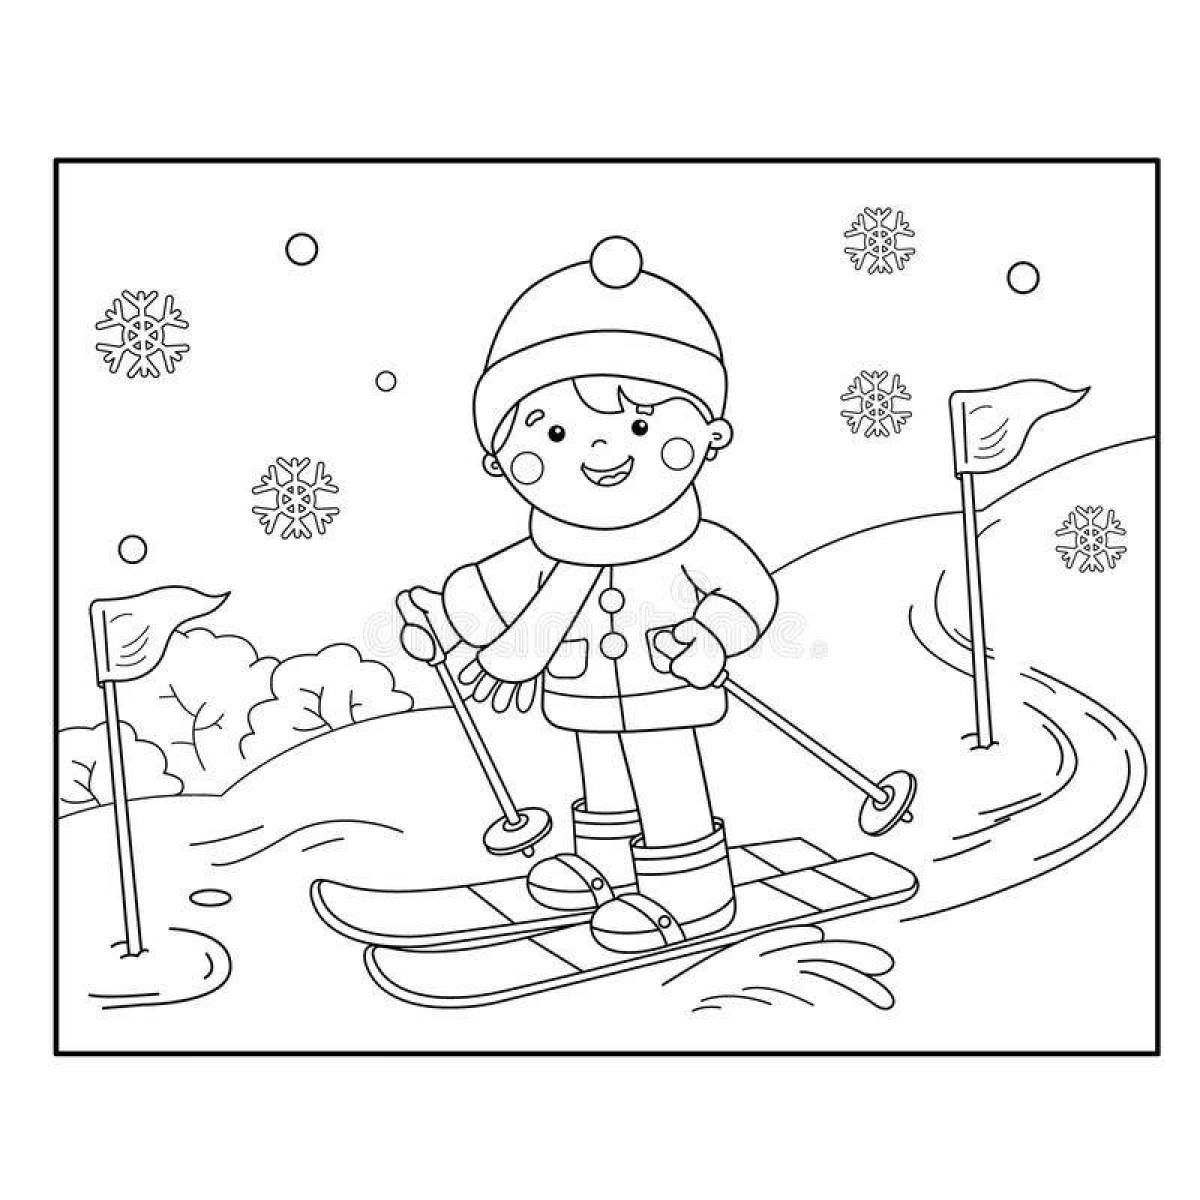 Great winter sports coloring book for 6-7 year olds